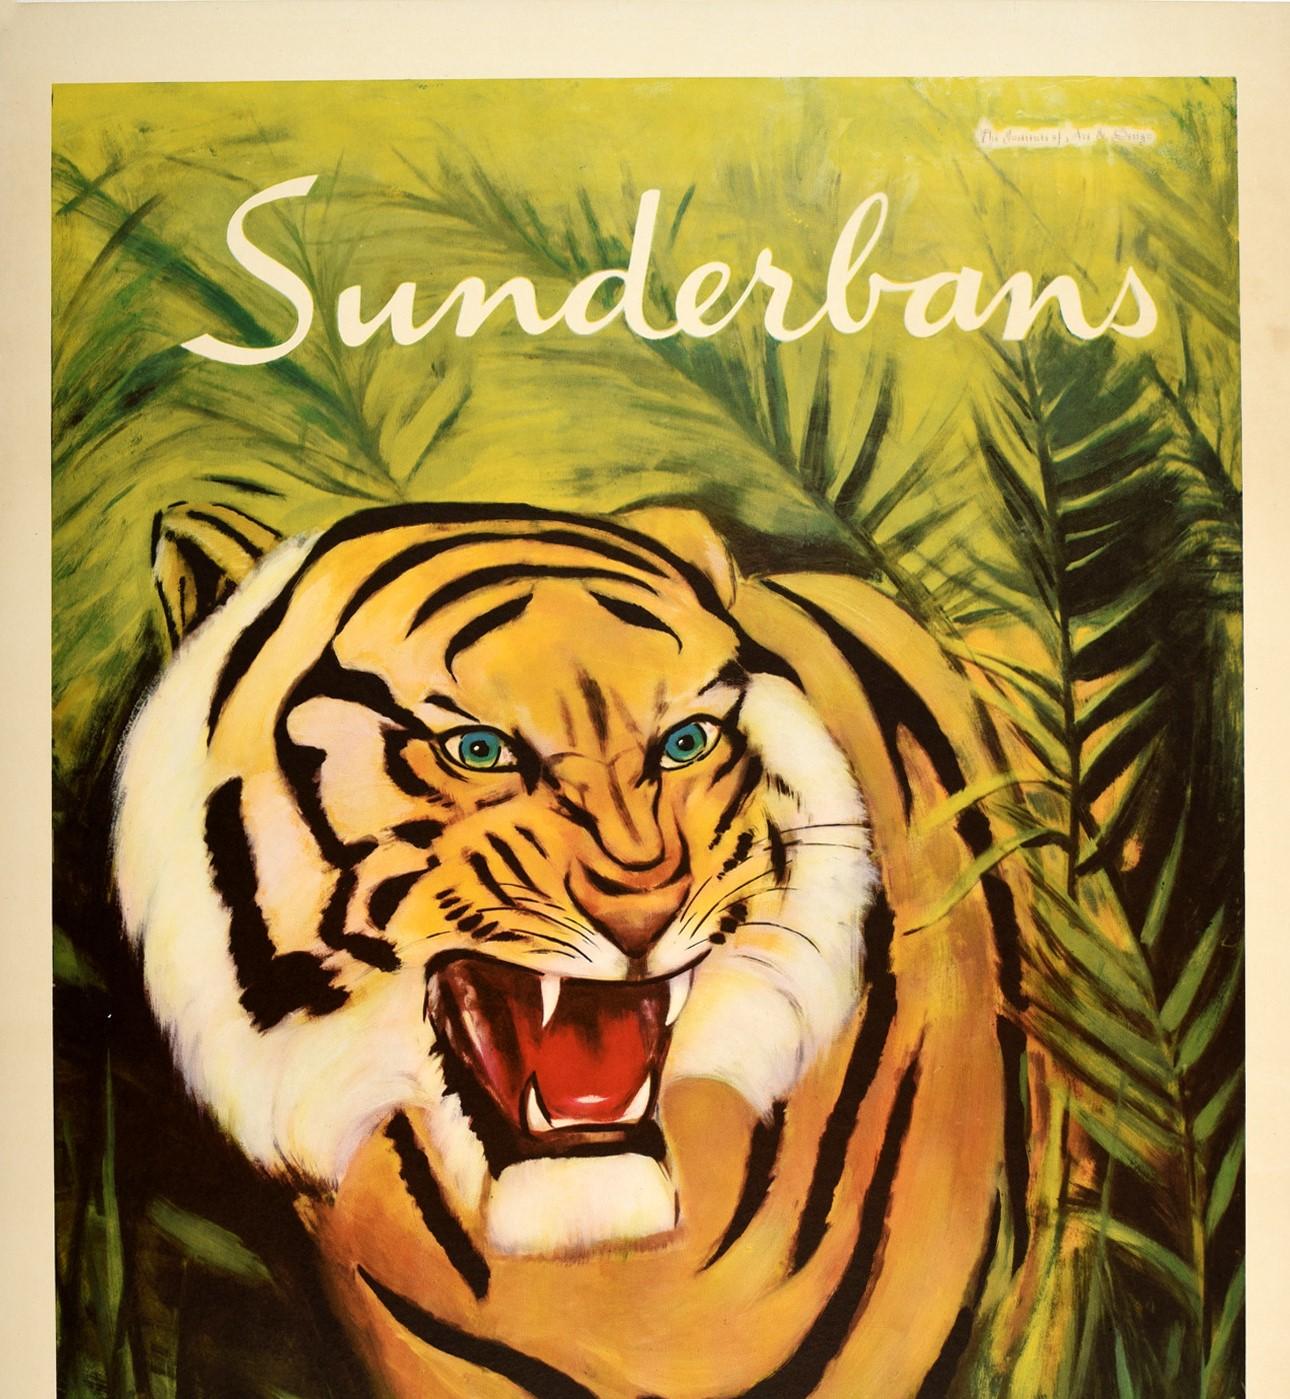 Original vintage travel poster for Sunderbans Pakistan featuring a great image of a roaring tiger emerging from the jungle undergrowth with the stylised text in white above and yellow below. The Sundarbans / Beautiful Forest is a mangrove area